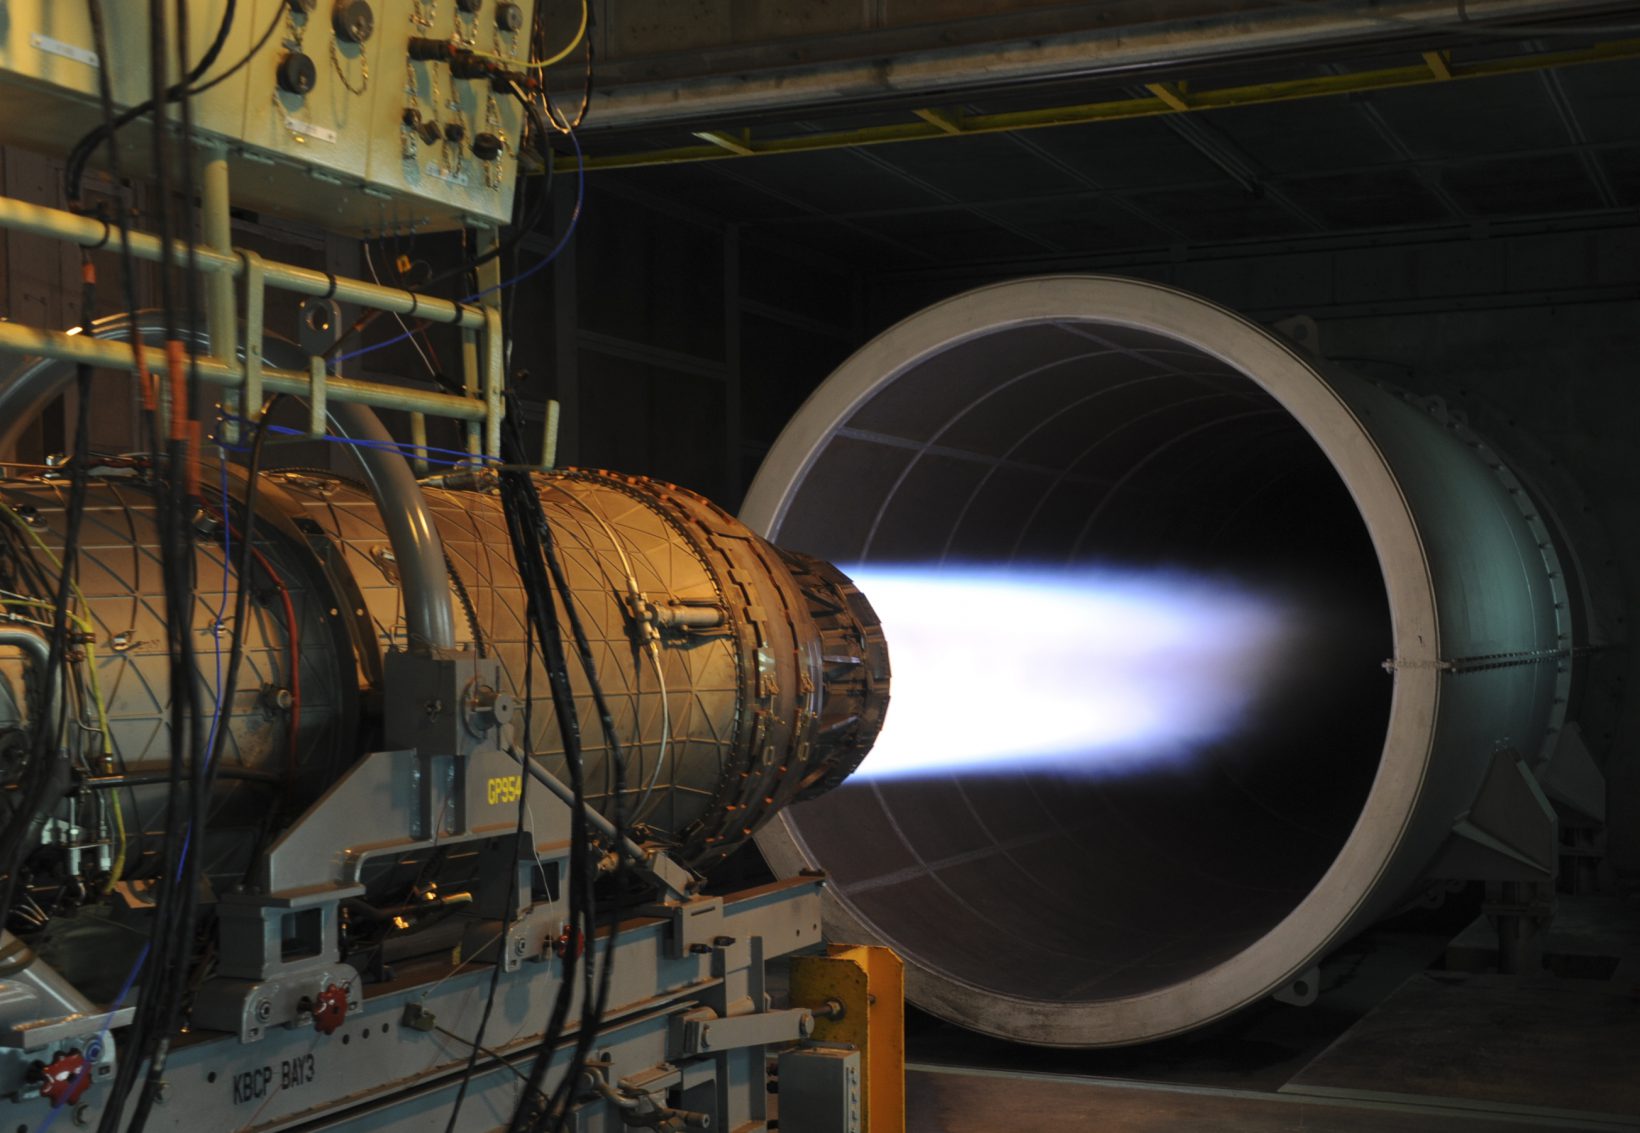 A U.S. Air Force F-15 Eagle fighter jet engine is pushed to maximum speed during a routine engine test at the 18th Component Maintenance Squadron on Kadena Air Base, Japan, June 26, 2012. 18th CMS engine test facility is primarily used for testing uninstalled engines following maintenance, and is also used as a trim pad to perform tests on highly powered aircrafts that run above 80 percent of the engines rated capacity. (U.S. Air Force photo/Airman 1st Class Justin Veazie)